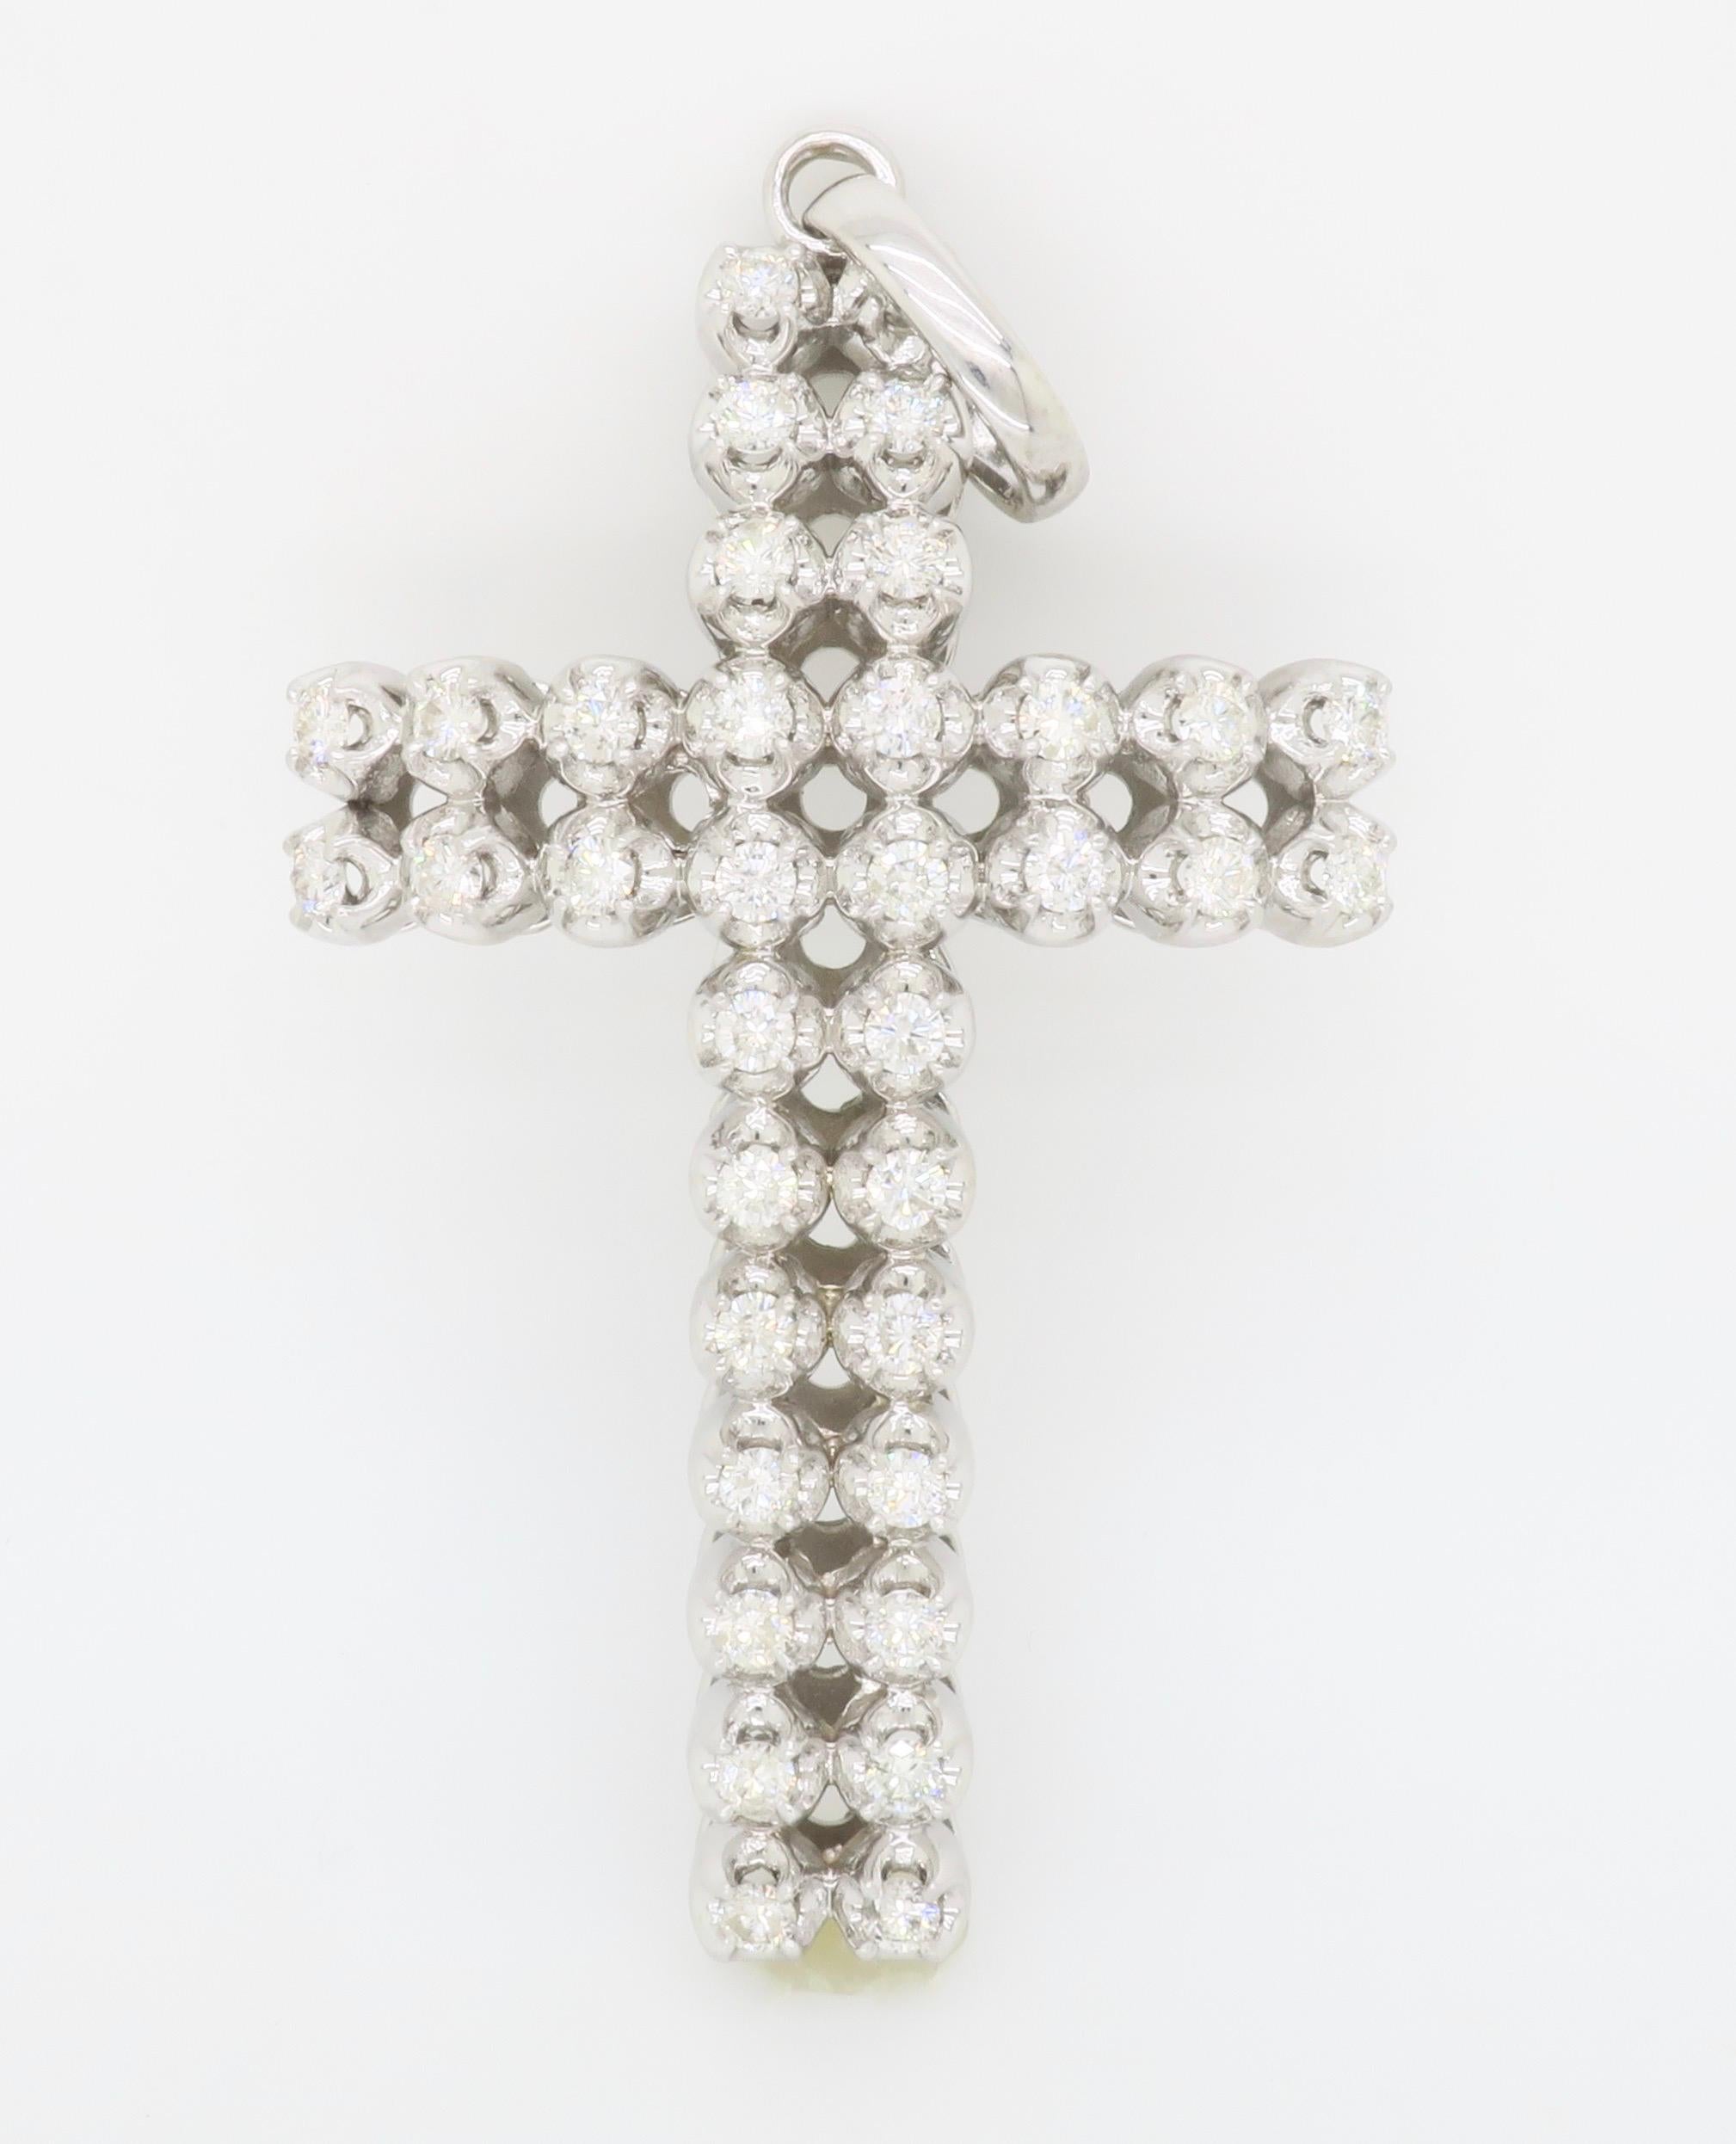 Large 3.80CTW Diamond Cross Pendant made in 14k White Gold  For Sale 5